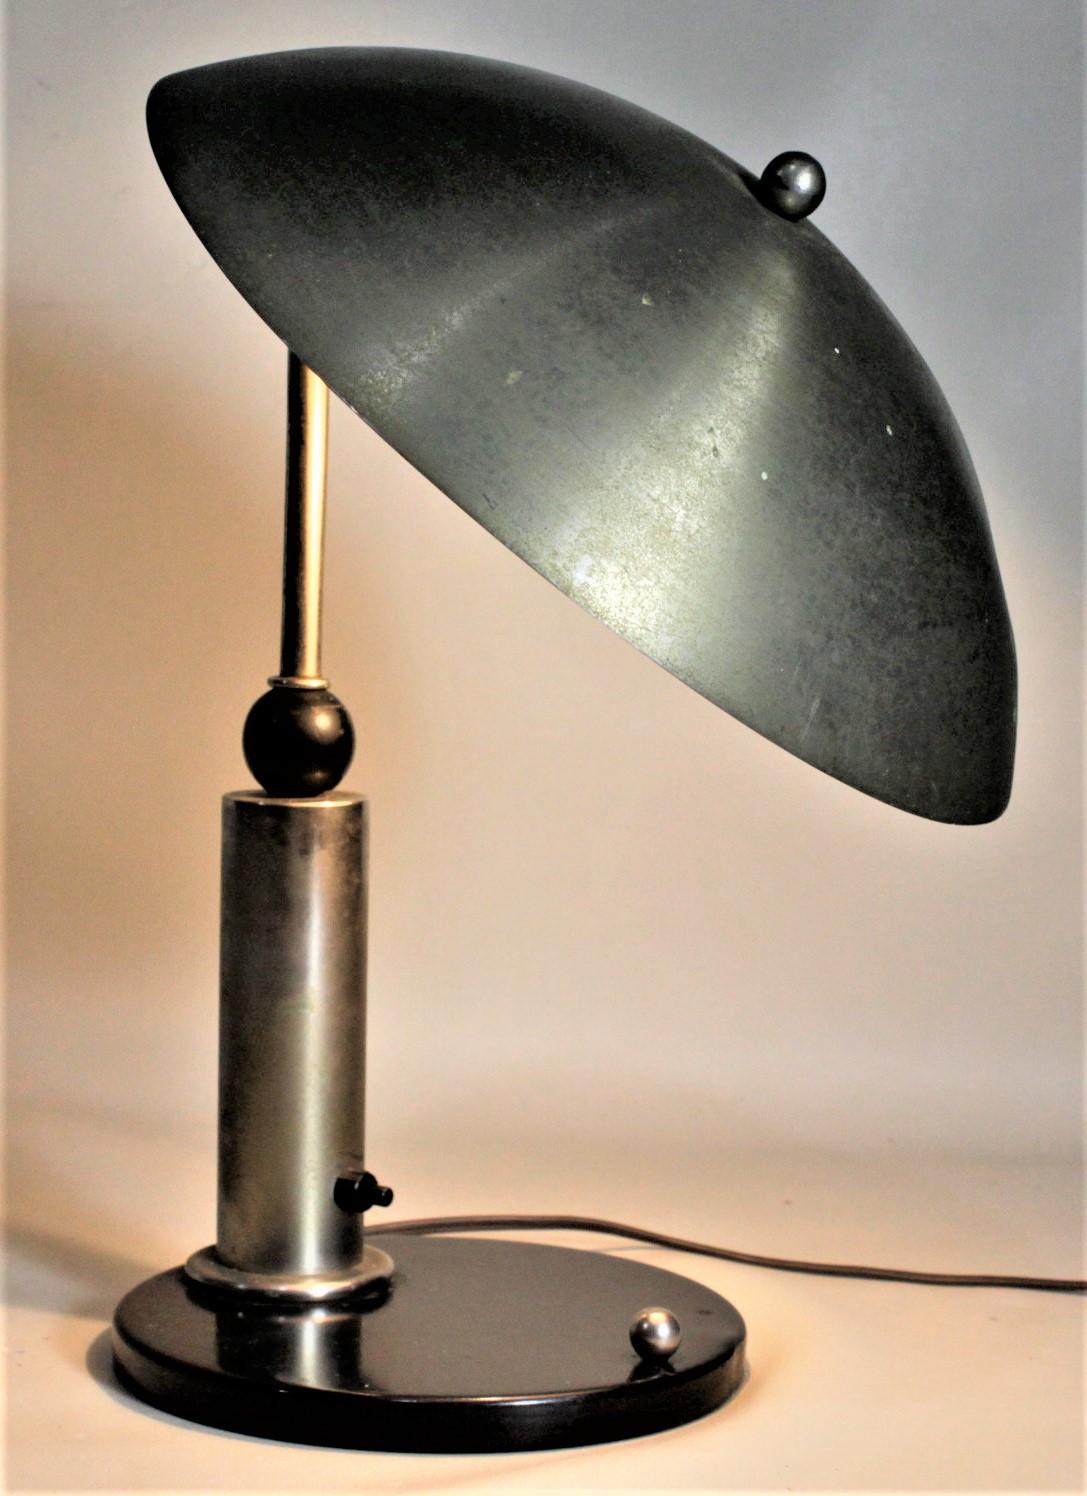 20th Century Mid-Century Modern Space Age Flying Saucer Styled Desk or Table Lamp